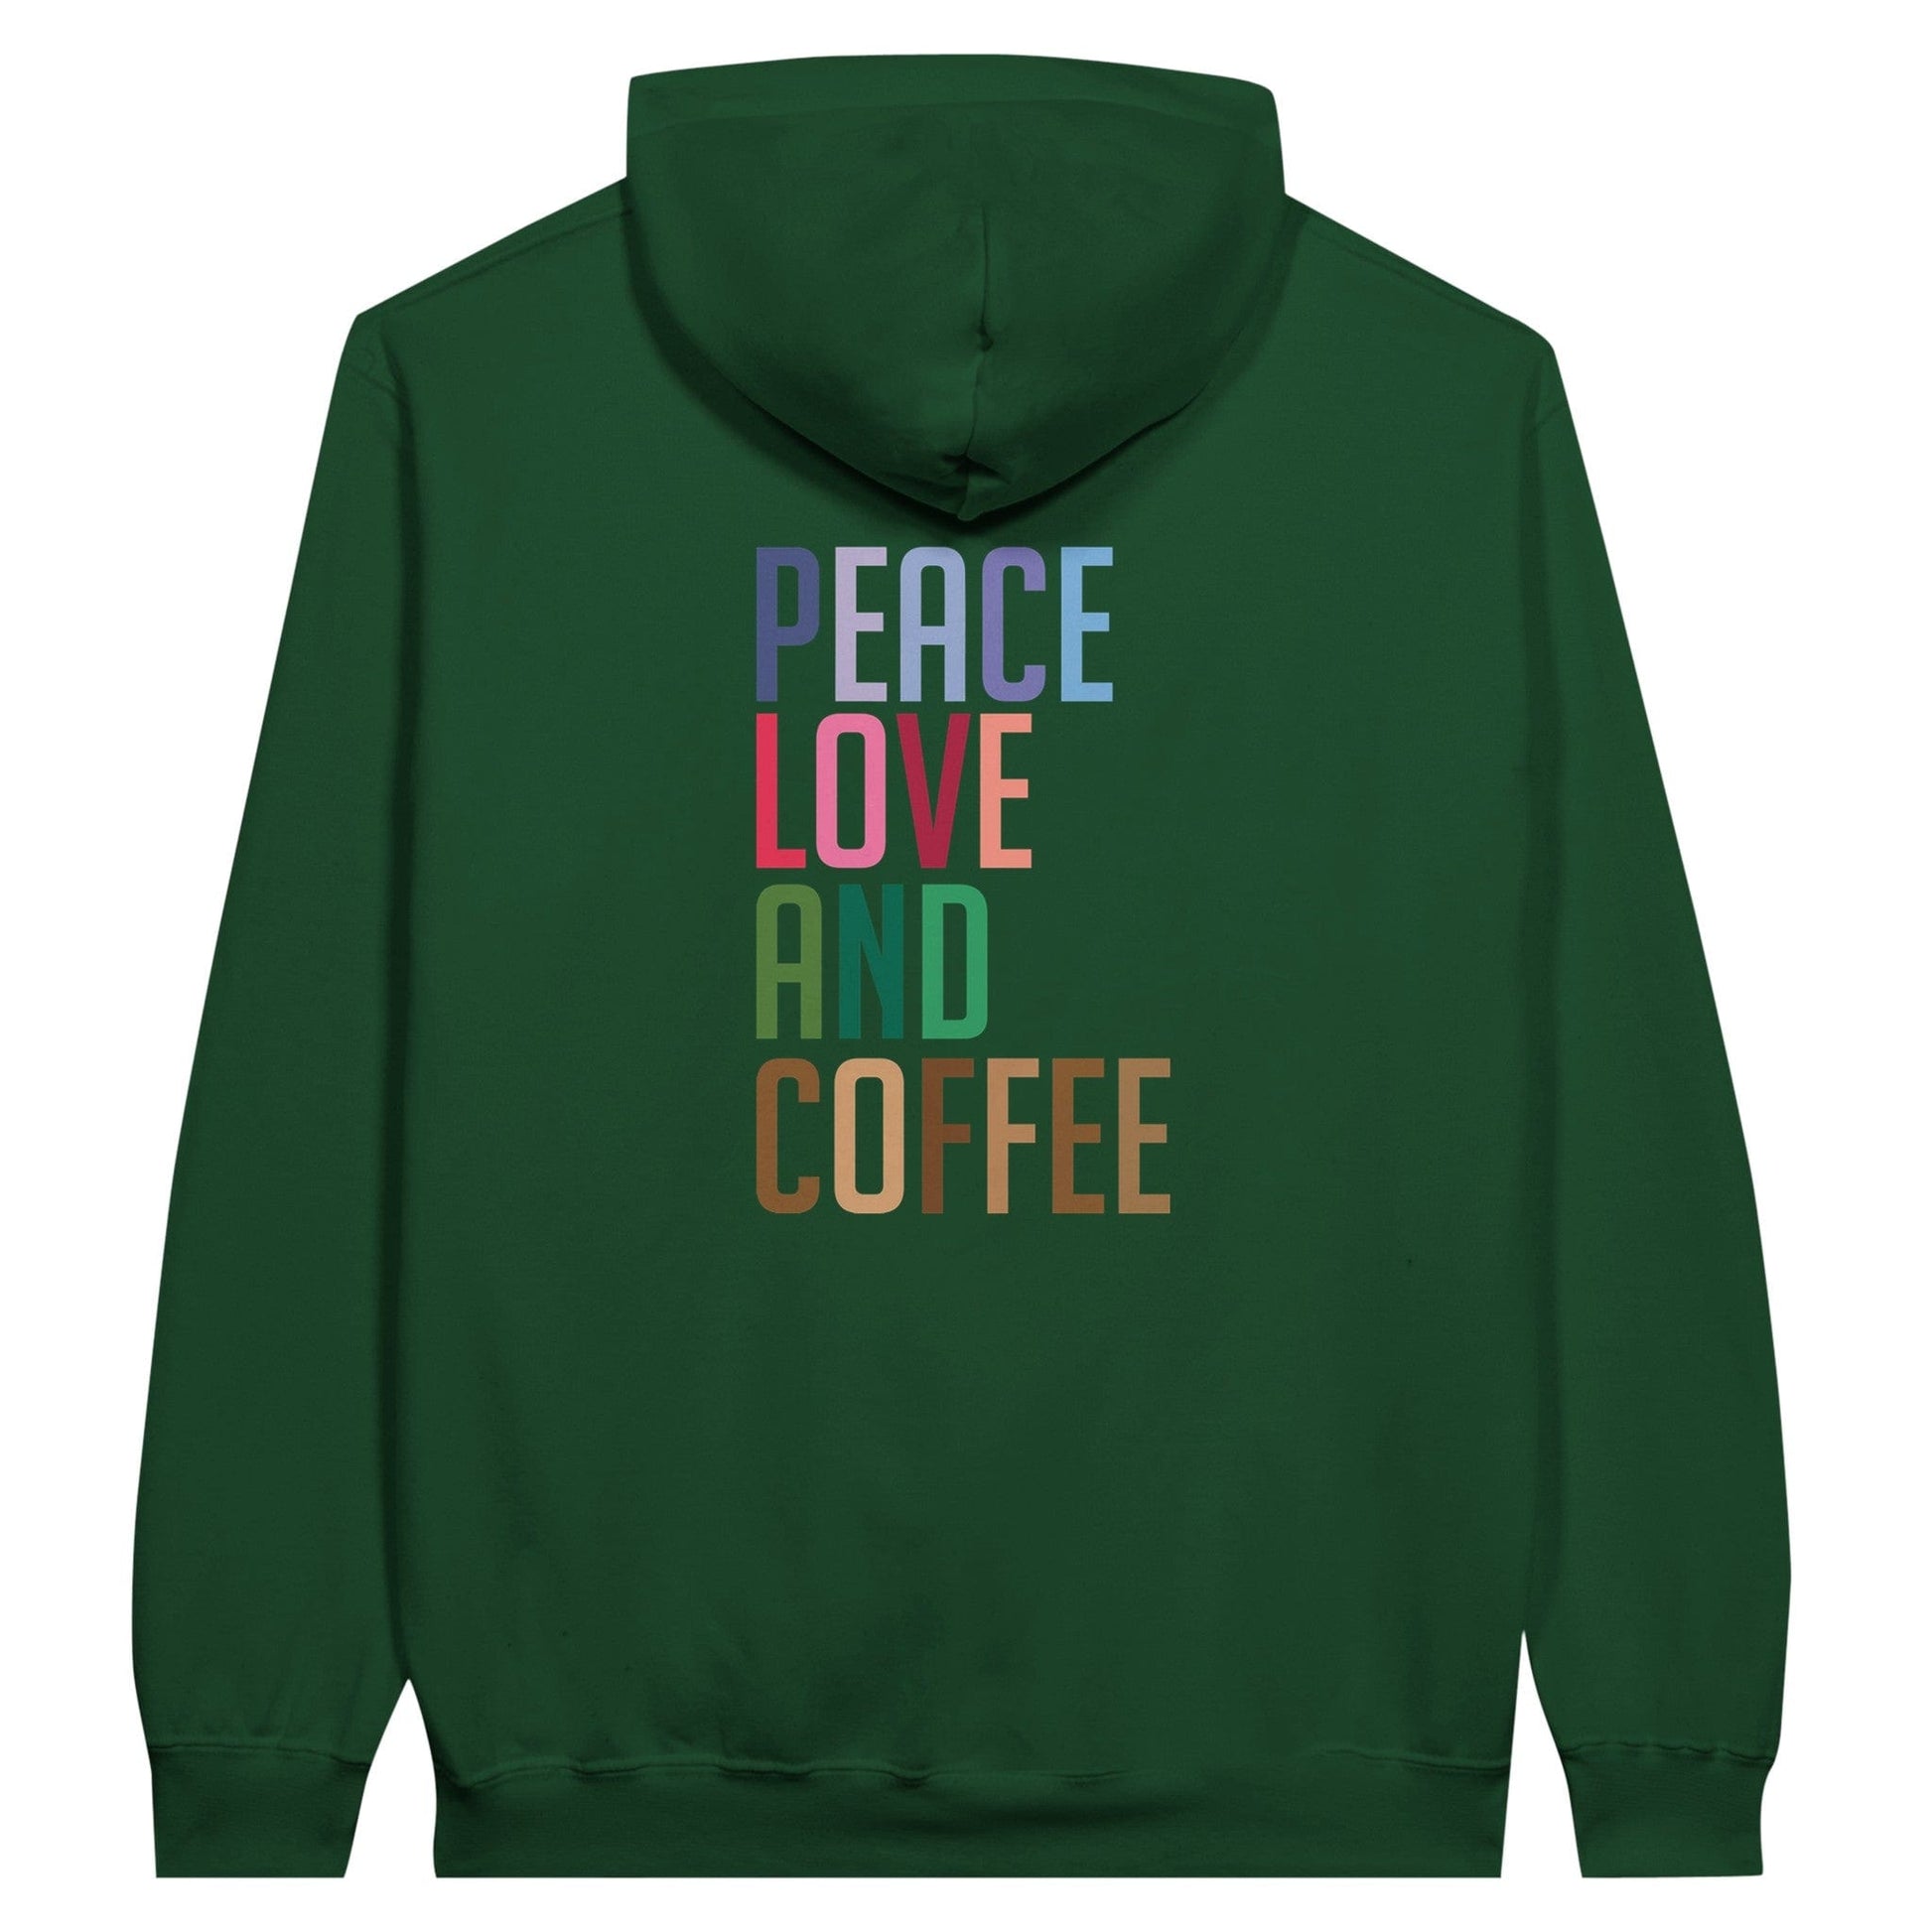 Good Bean Gifts "Peace Love and Coffee" -Unisex Pullover Hoodie (Back of hoodie imprint) Forest Green / S